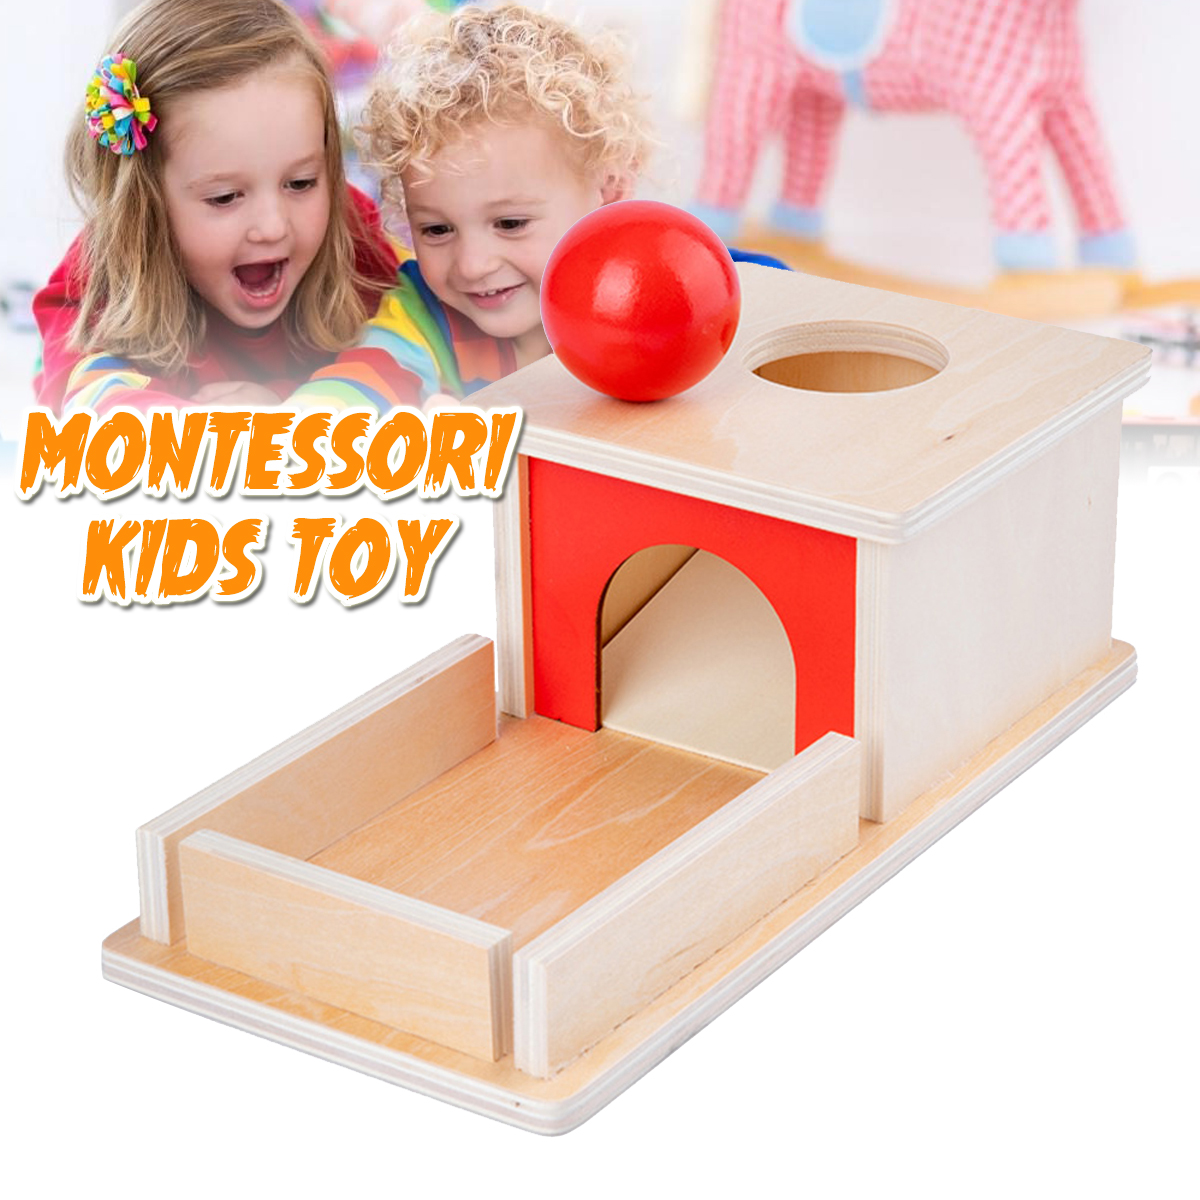 Montessori-Object-Permanence-Box-Wooden-Permanent-Box-Practical-Learning-Educational-Toy-for-Kids-Gi-1773227-1